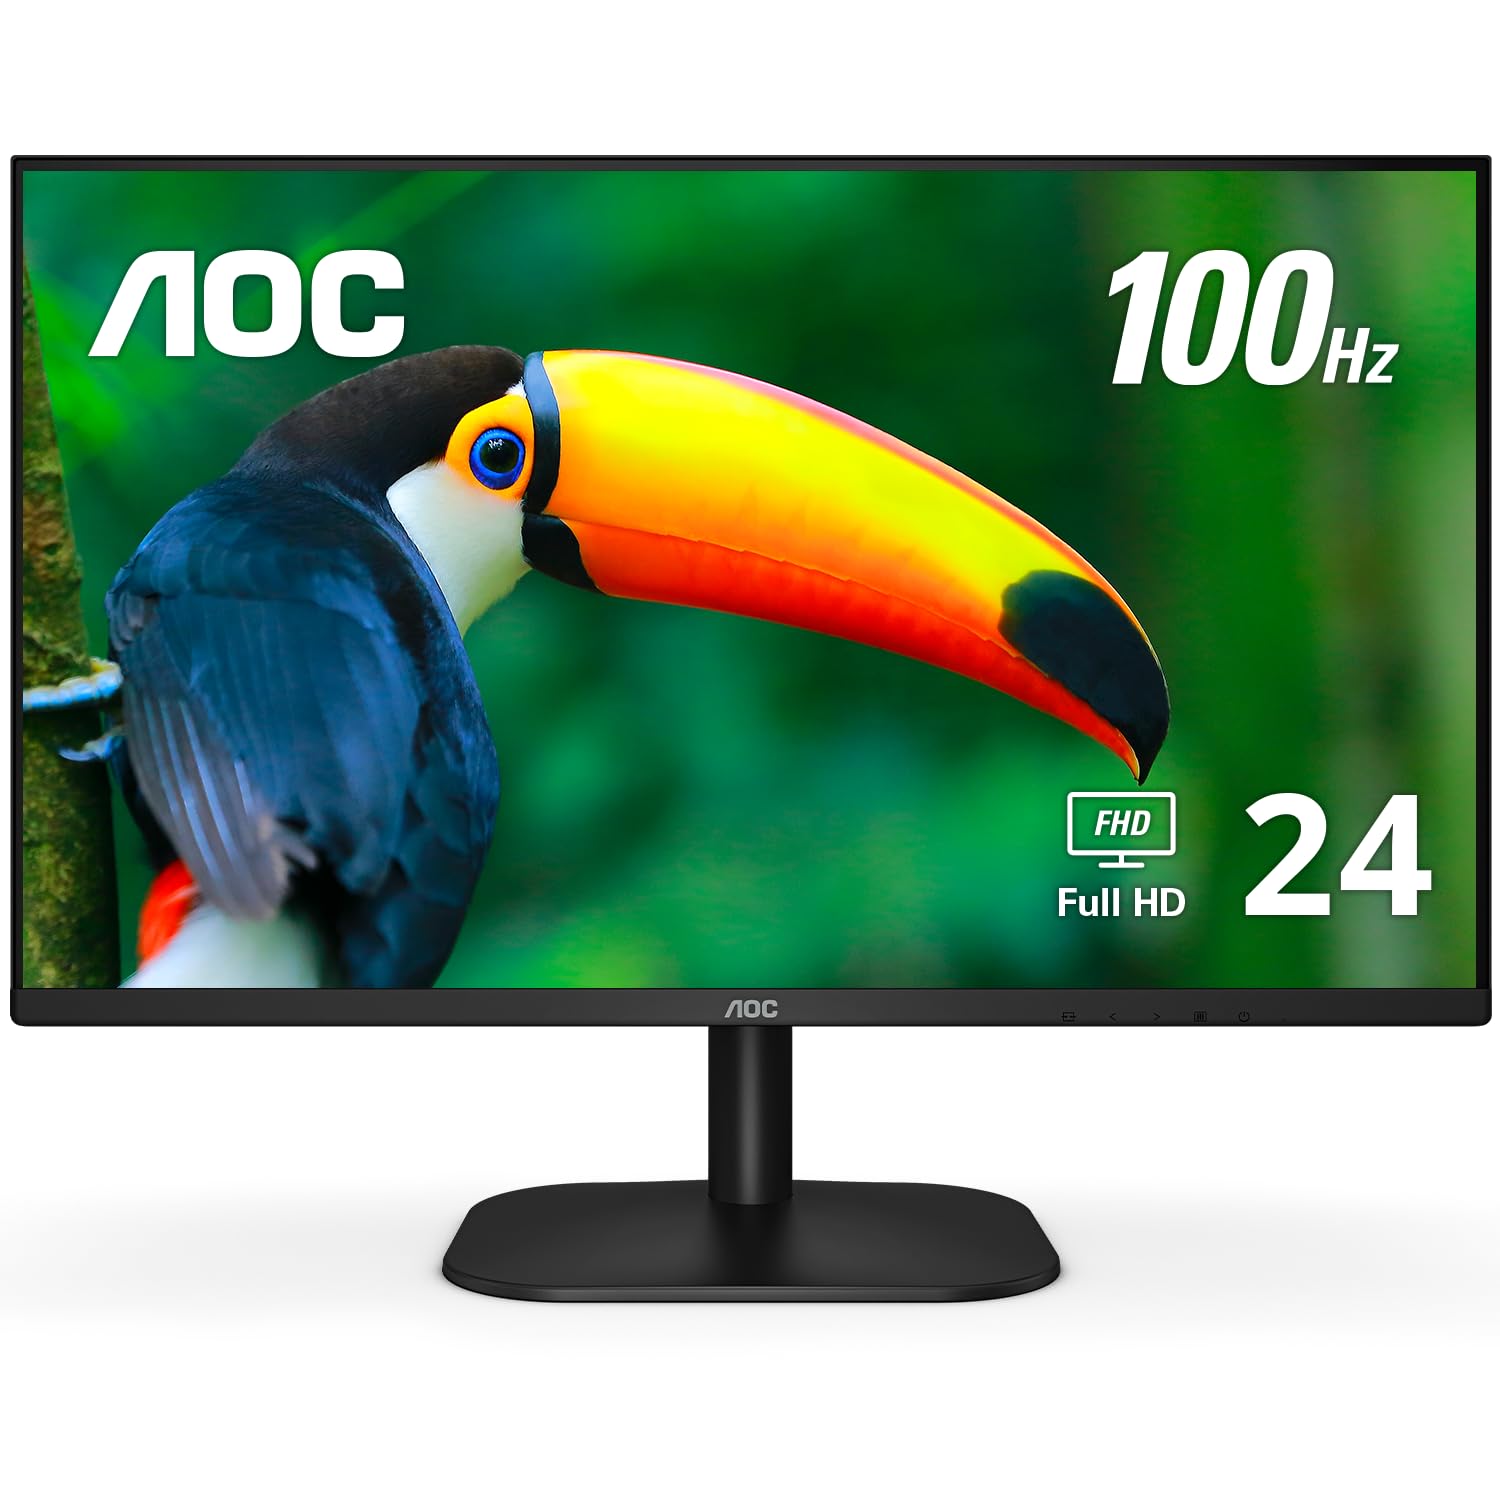 AOC 24B2H2 24” Frameless IPS Monitor, FHD 1920x1080, 100Hz, 106% sRGB, for Home and Office, HDMI and VGA Input, Low Blue Mode, VESA Compatible